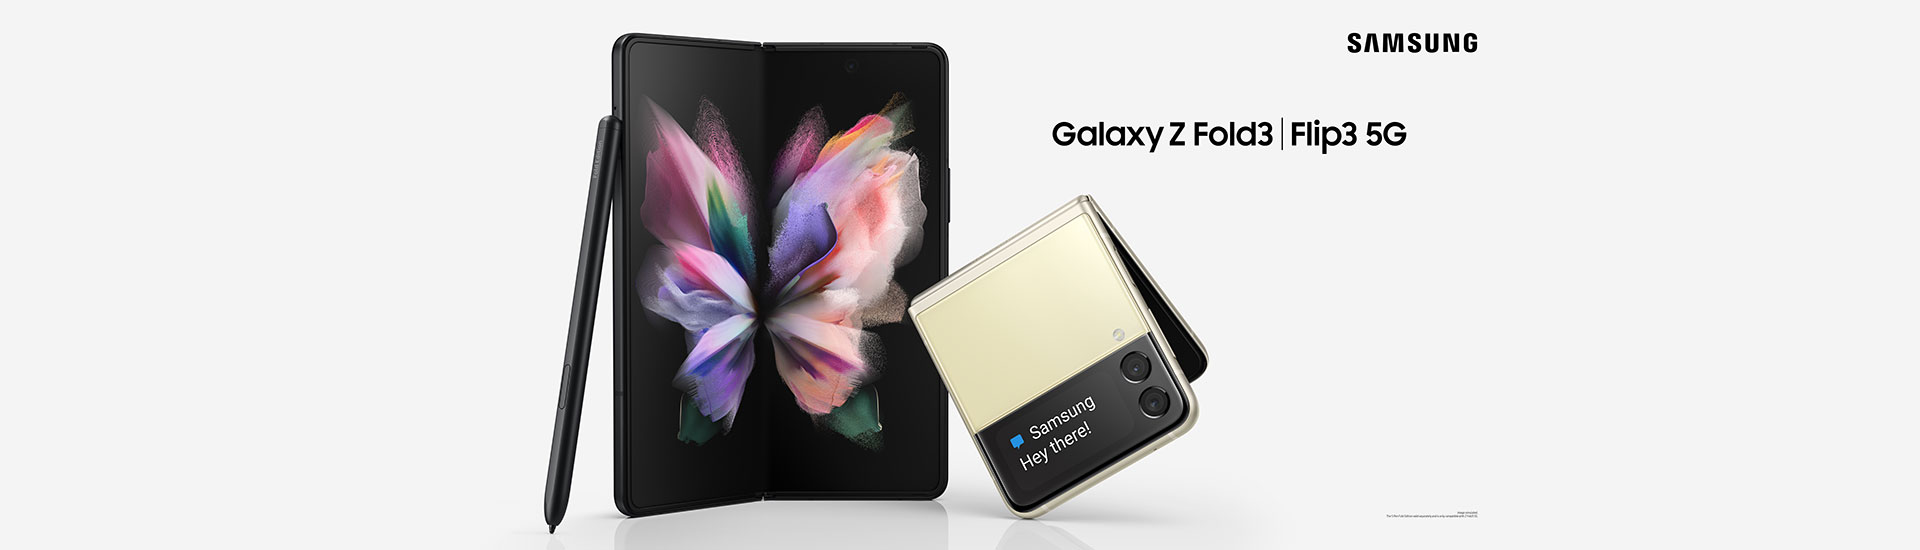 Samsung Galaxy Z Series up to 45% discount upon subscription. Galaxy Z Fold3 5G enjoy to free premiums (Total value $2,196). Galaxy Z Flip3 5G enjoy to free Silicone Cover with Strap (value $398).